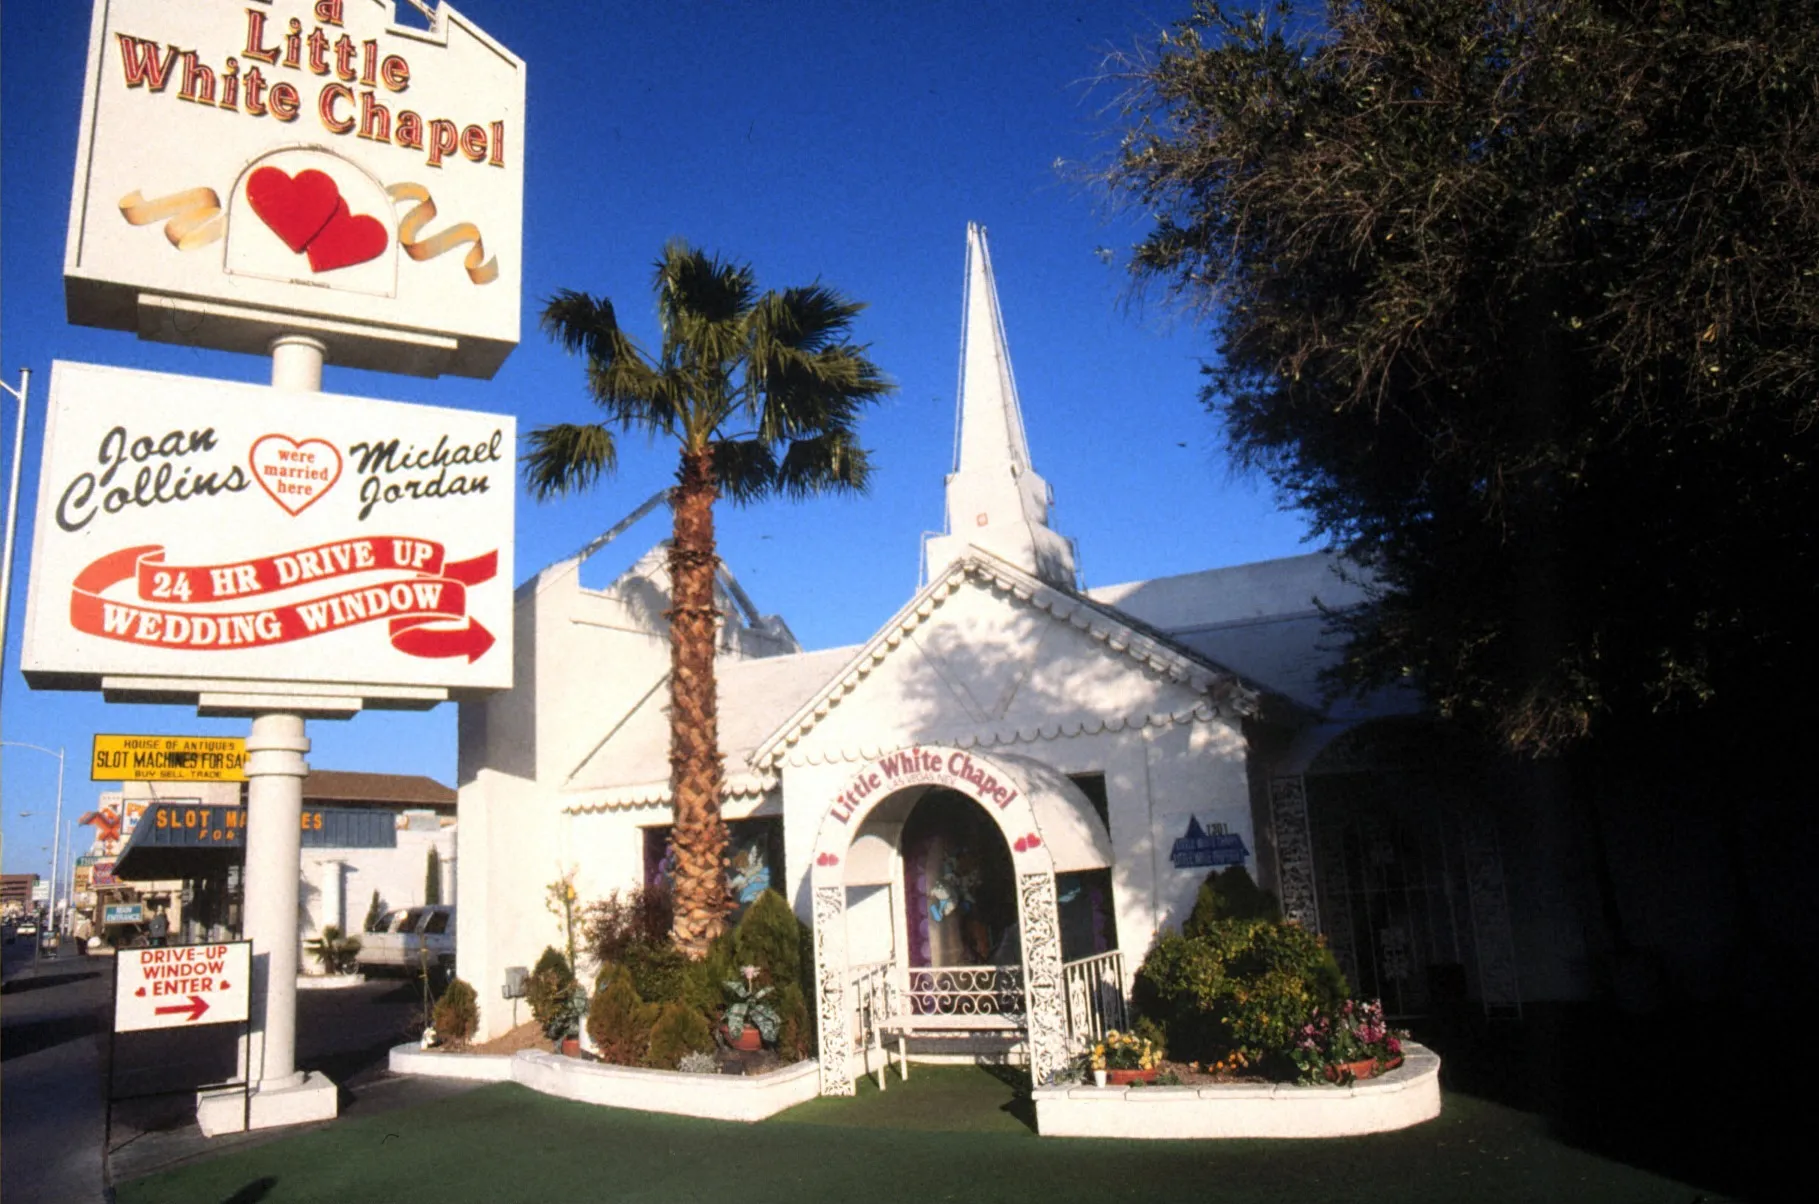 The White Wedding Chapel where Britney Spears got hitched